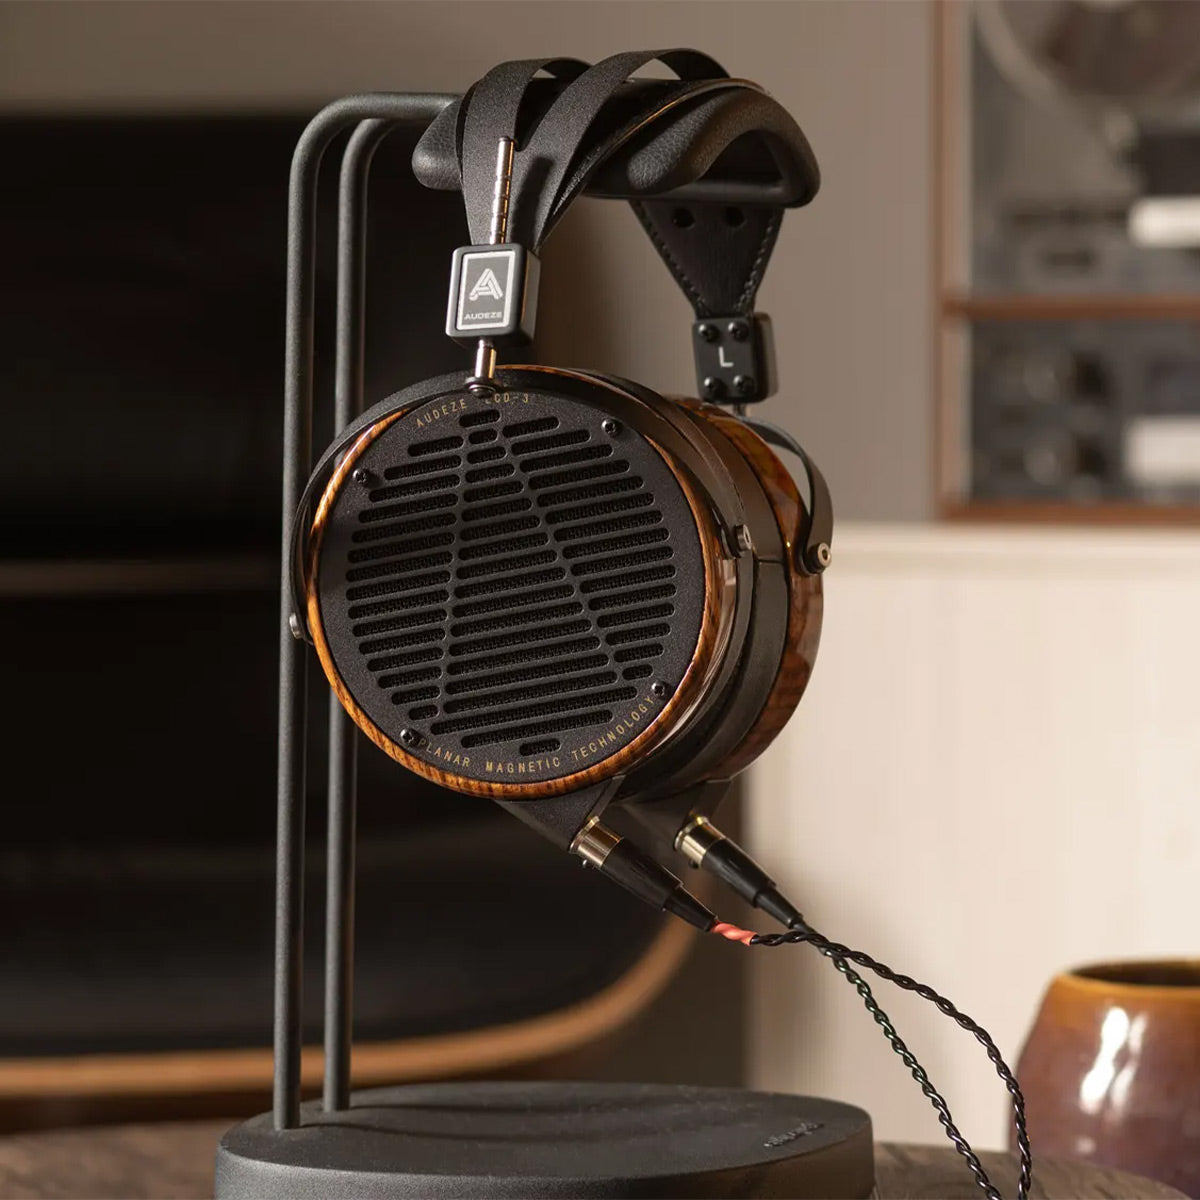 Audeze LCD-3 Planar Magnetic Over-Ear Headphones with Carrying Case (Zebrano, Leather-Free)